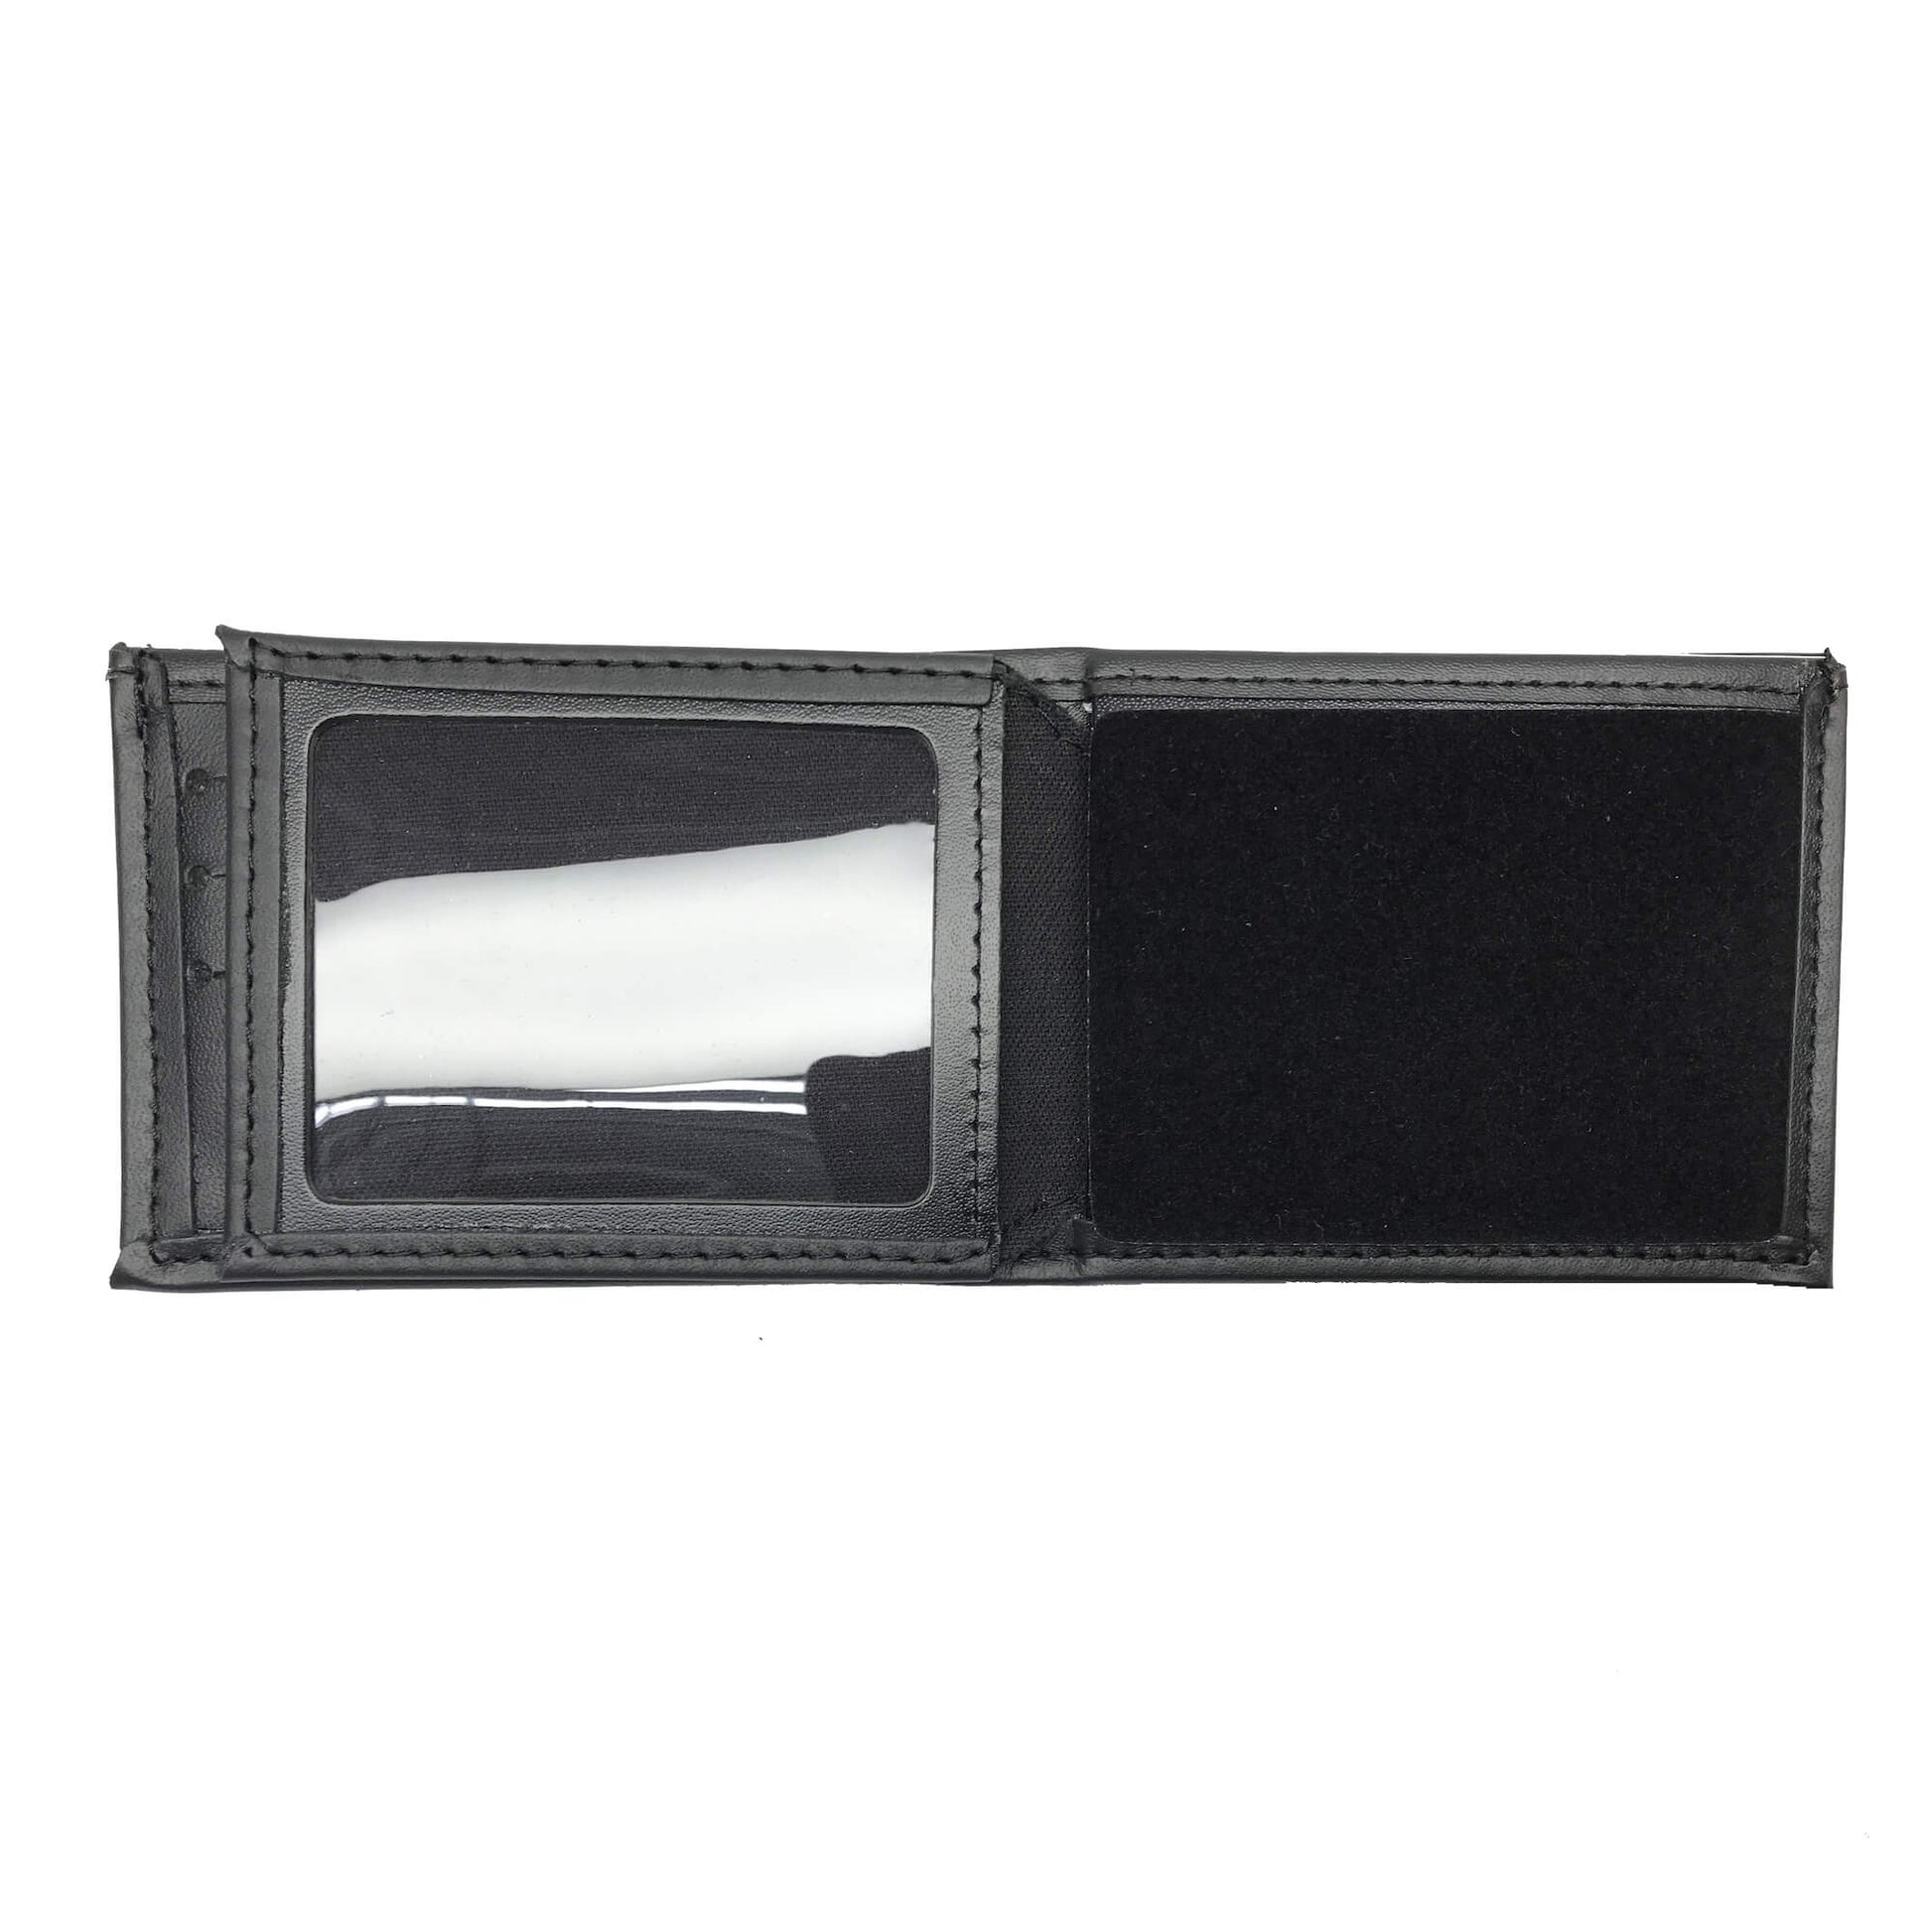  Wallet & Police Badge Holder - Style mw2516TA : Office